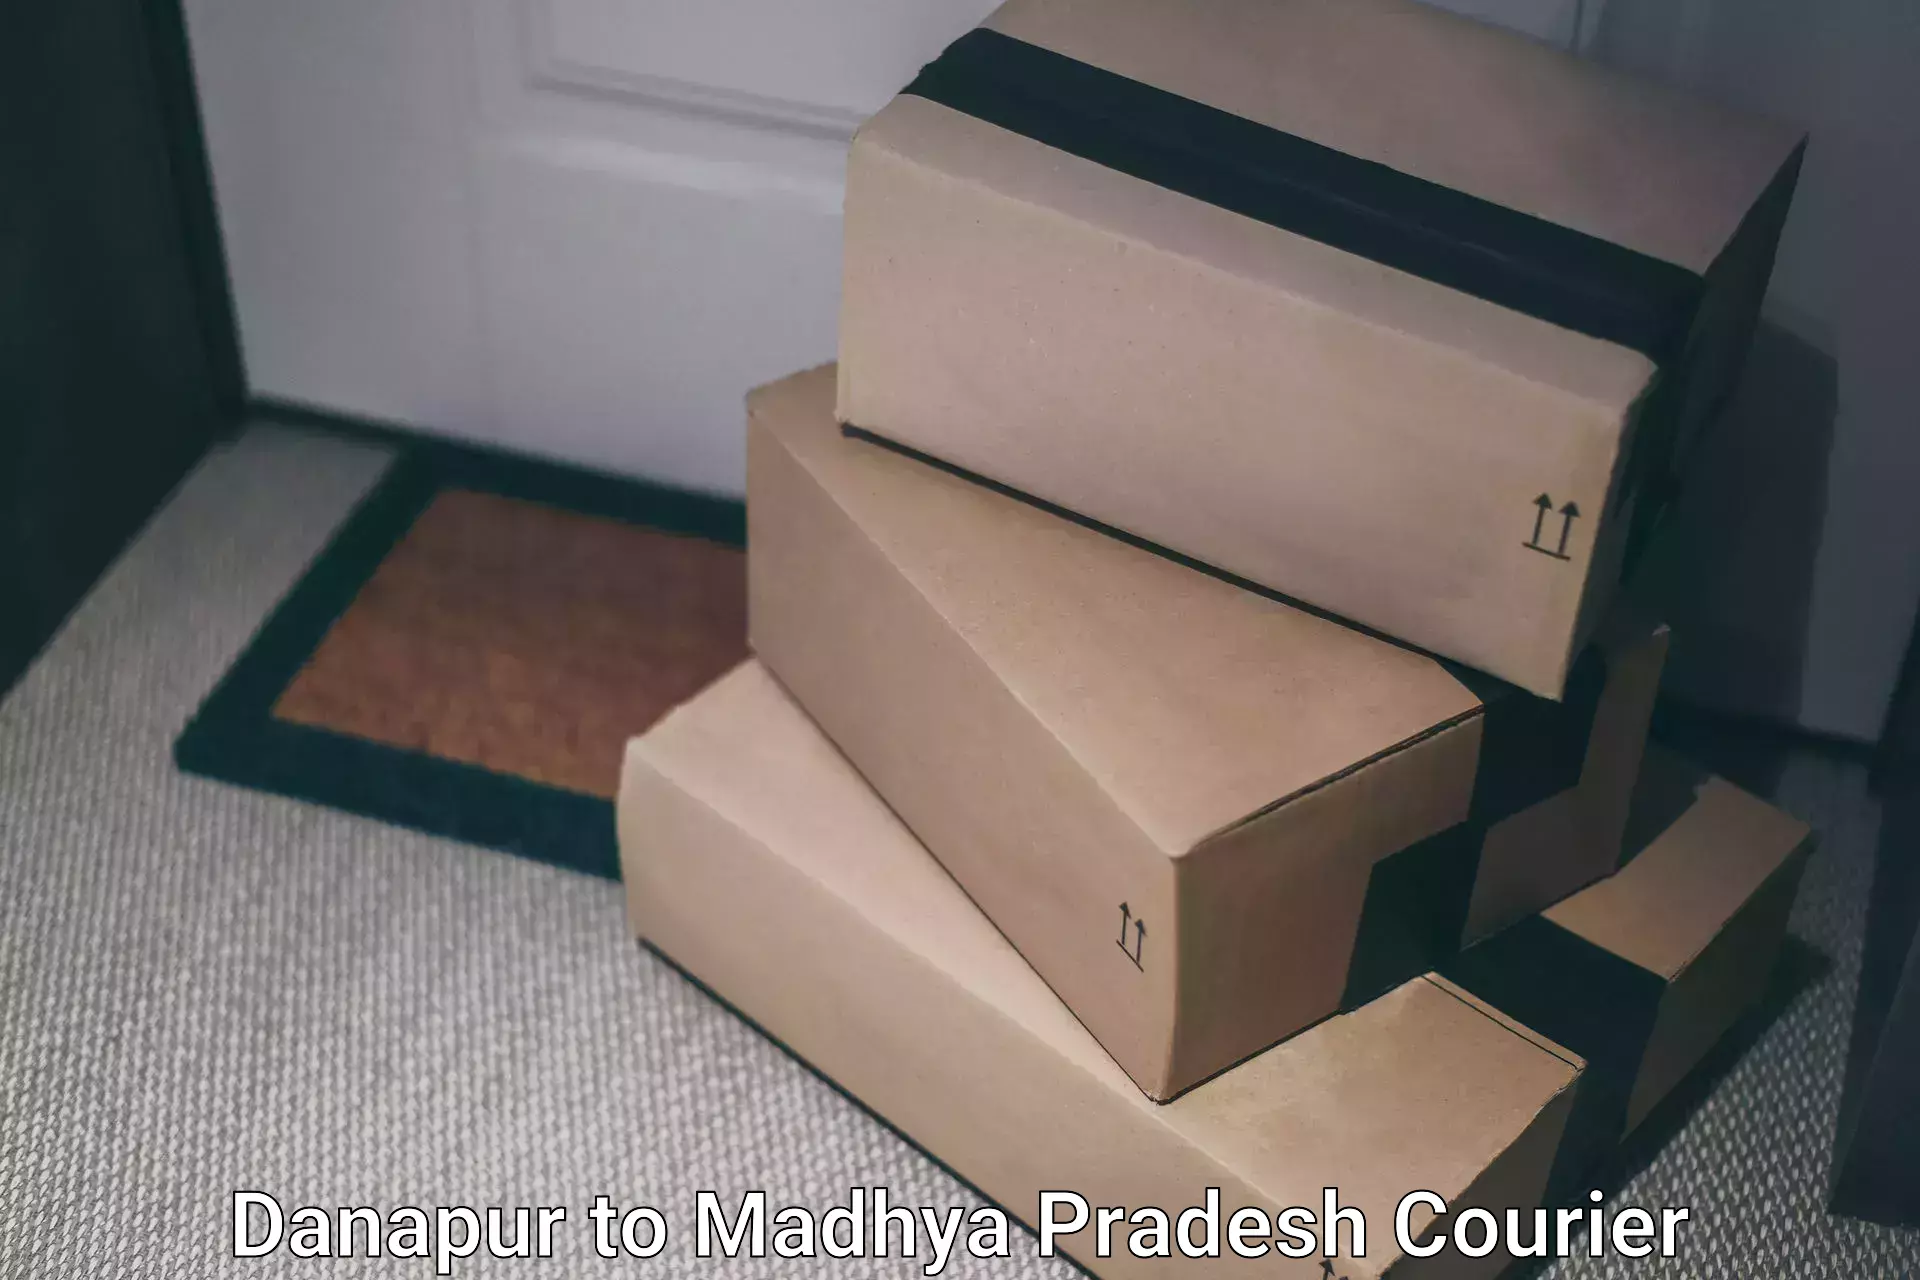 Reliable parcel services in Danapur to BHEL Bhopal